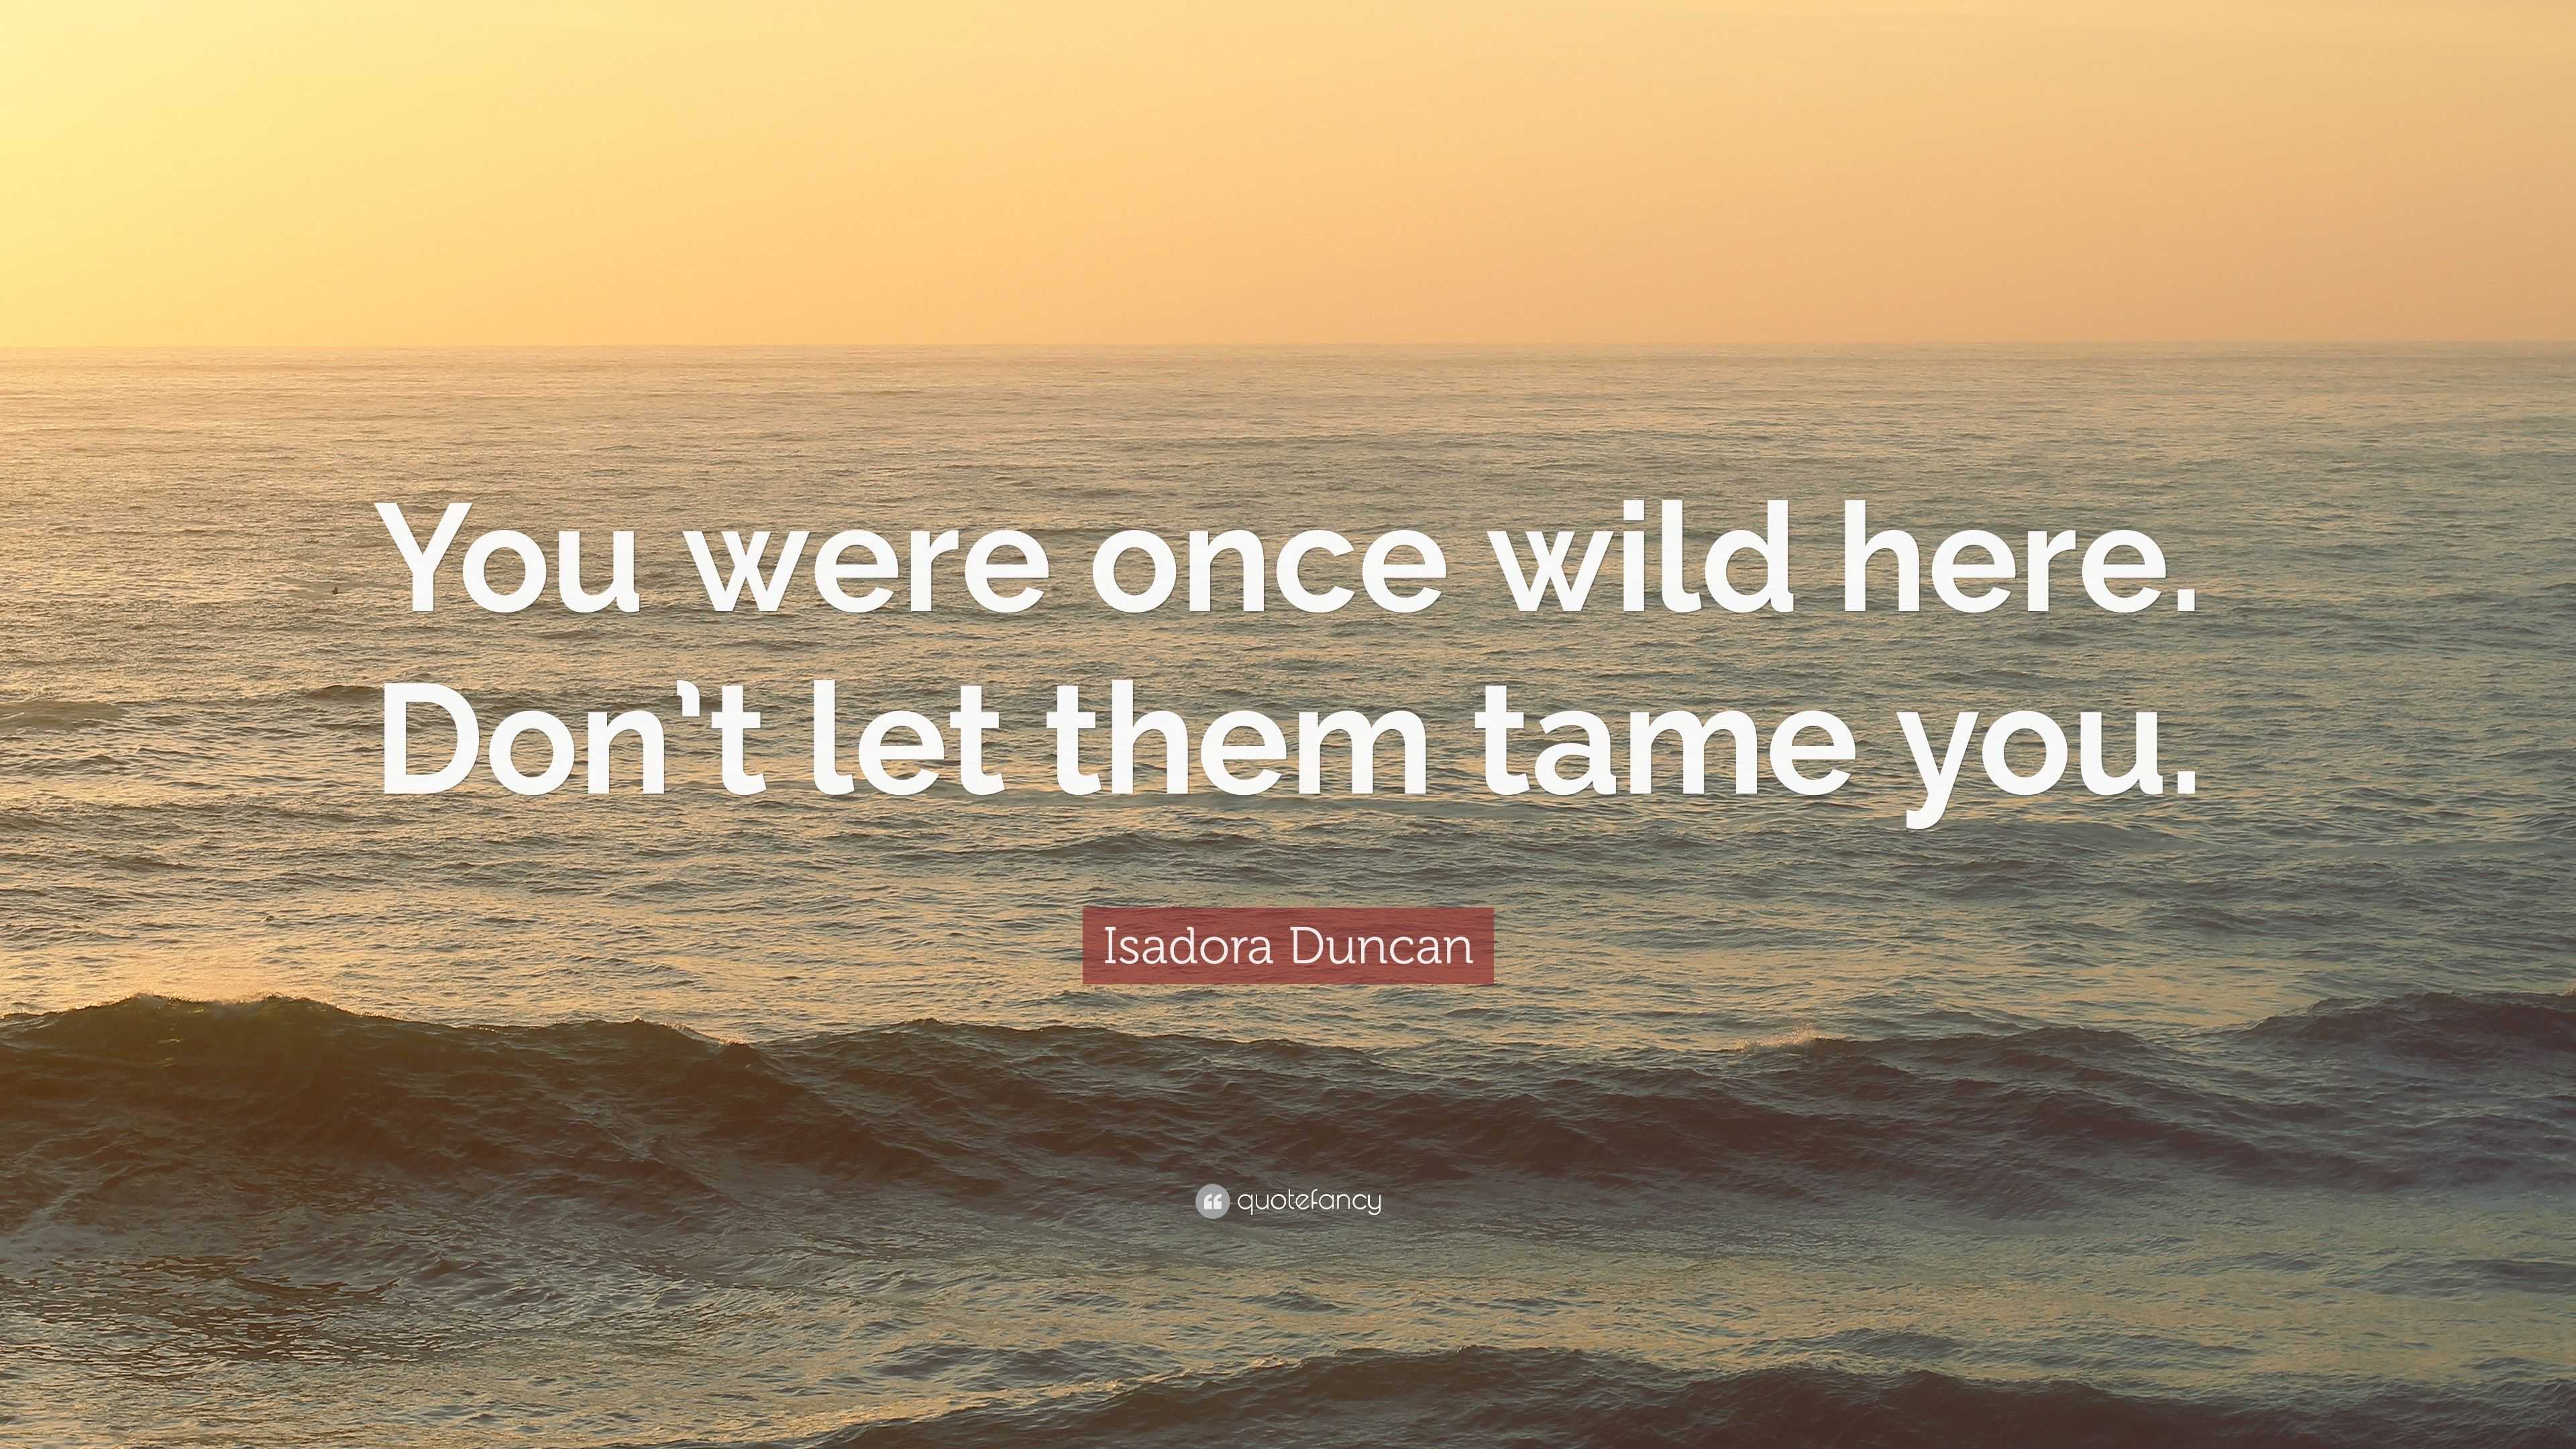 Isadora Duncan Quote “you Were Once Wild Here Dont Let Them Tame You”